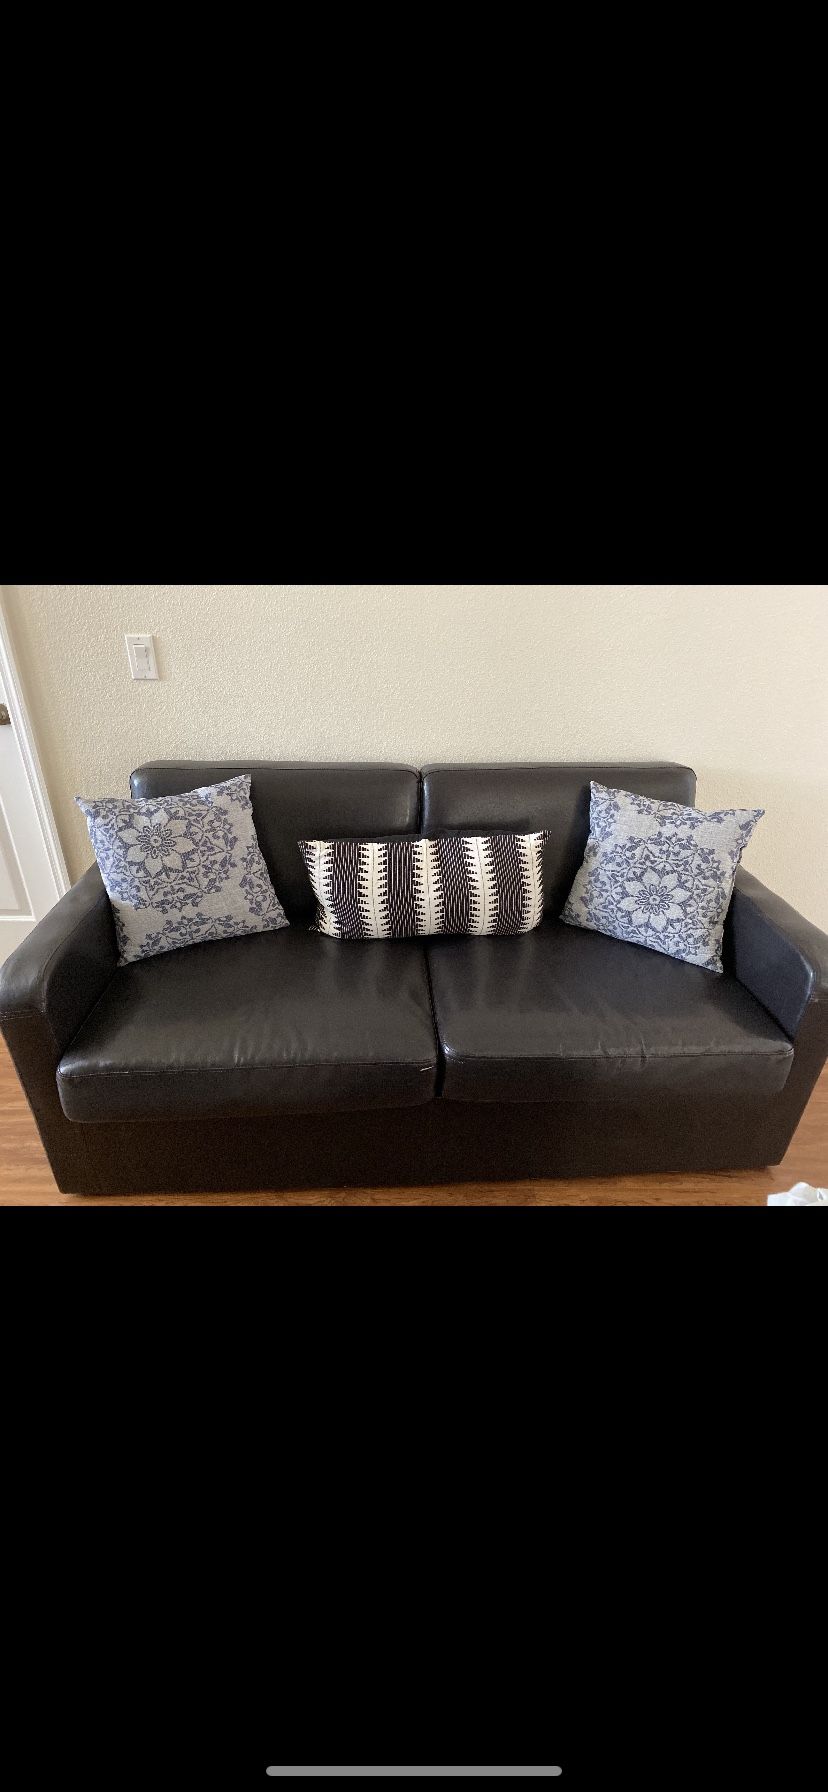 Loveseat can turn in full size bed pillows not included.Good condition